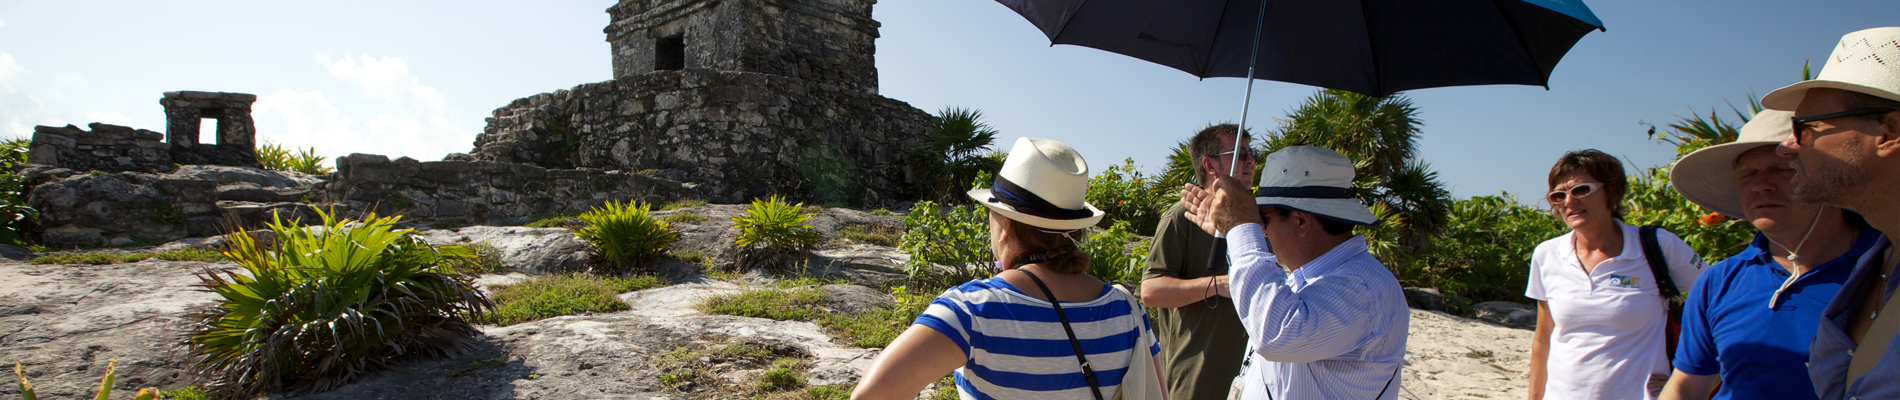 Expert guides in Mexico on private tours